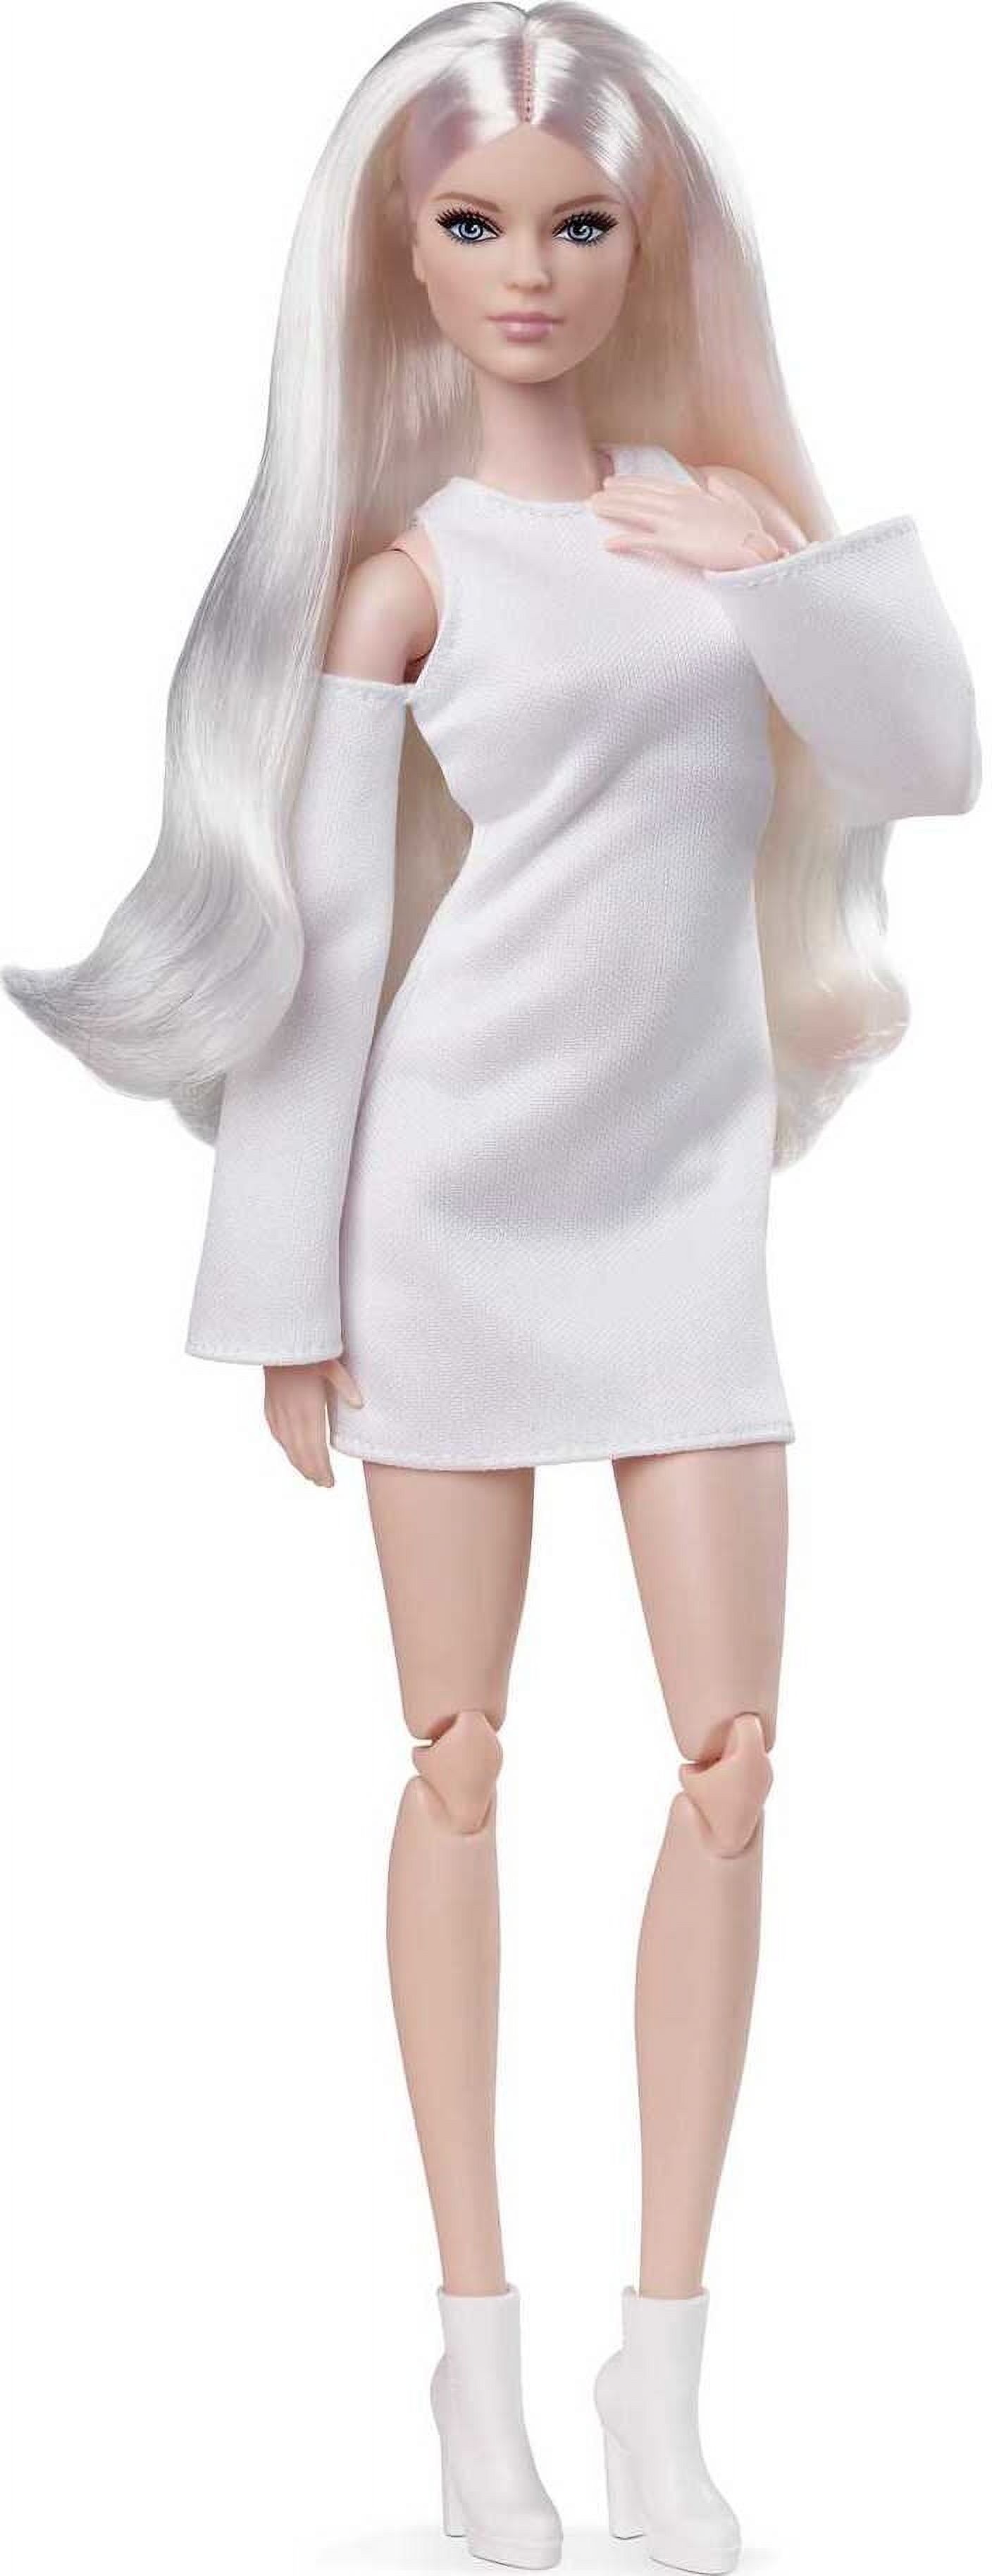 Barbie Signature Barbie Looks Doll (Tall, Blonde) Fully Posable Fashion Doll Wearing White Dress & Platform Boots, Gift for Collectors - image 1 of 7